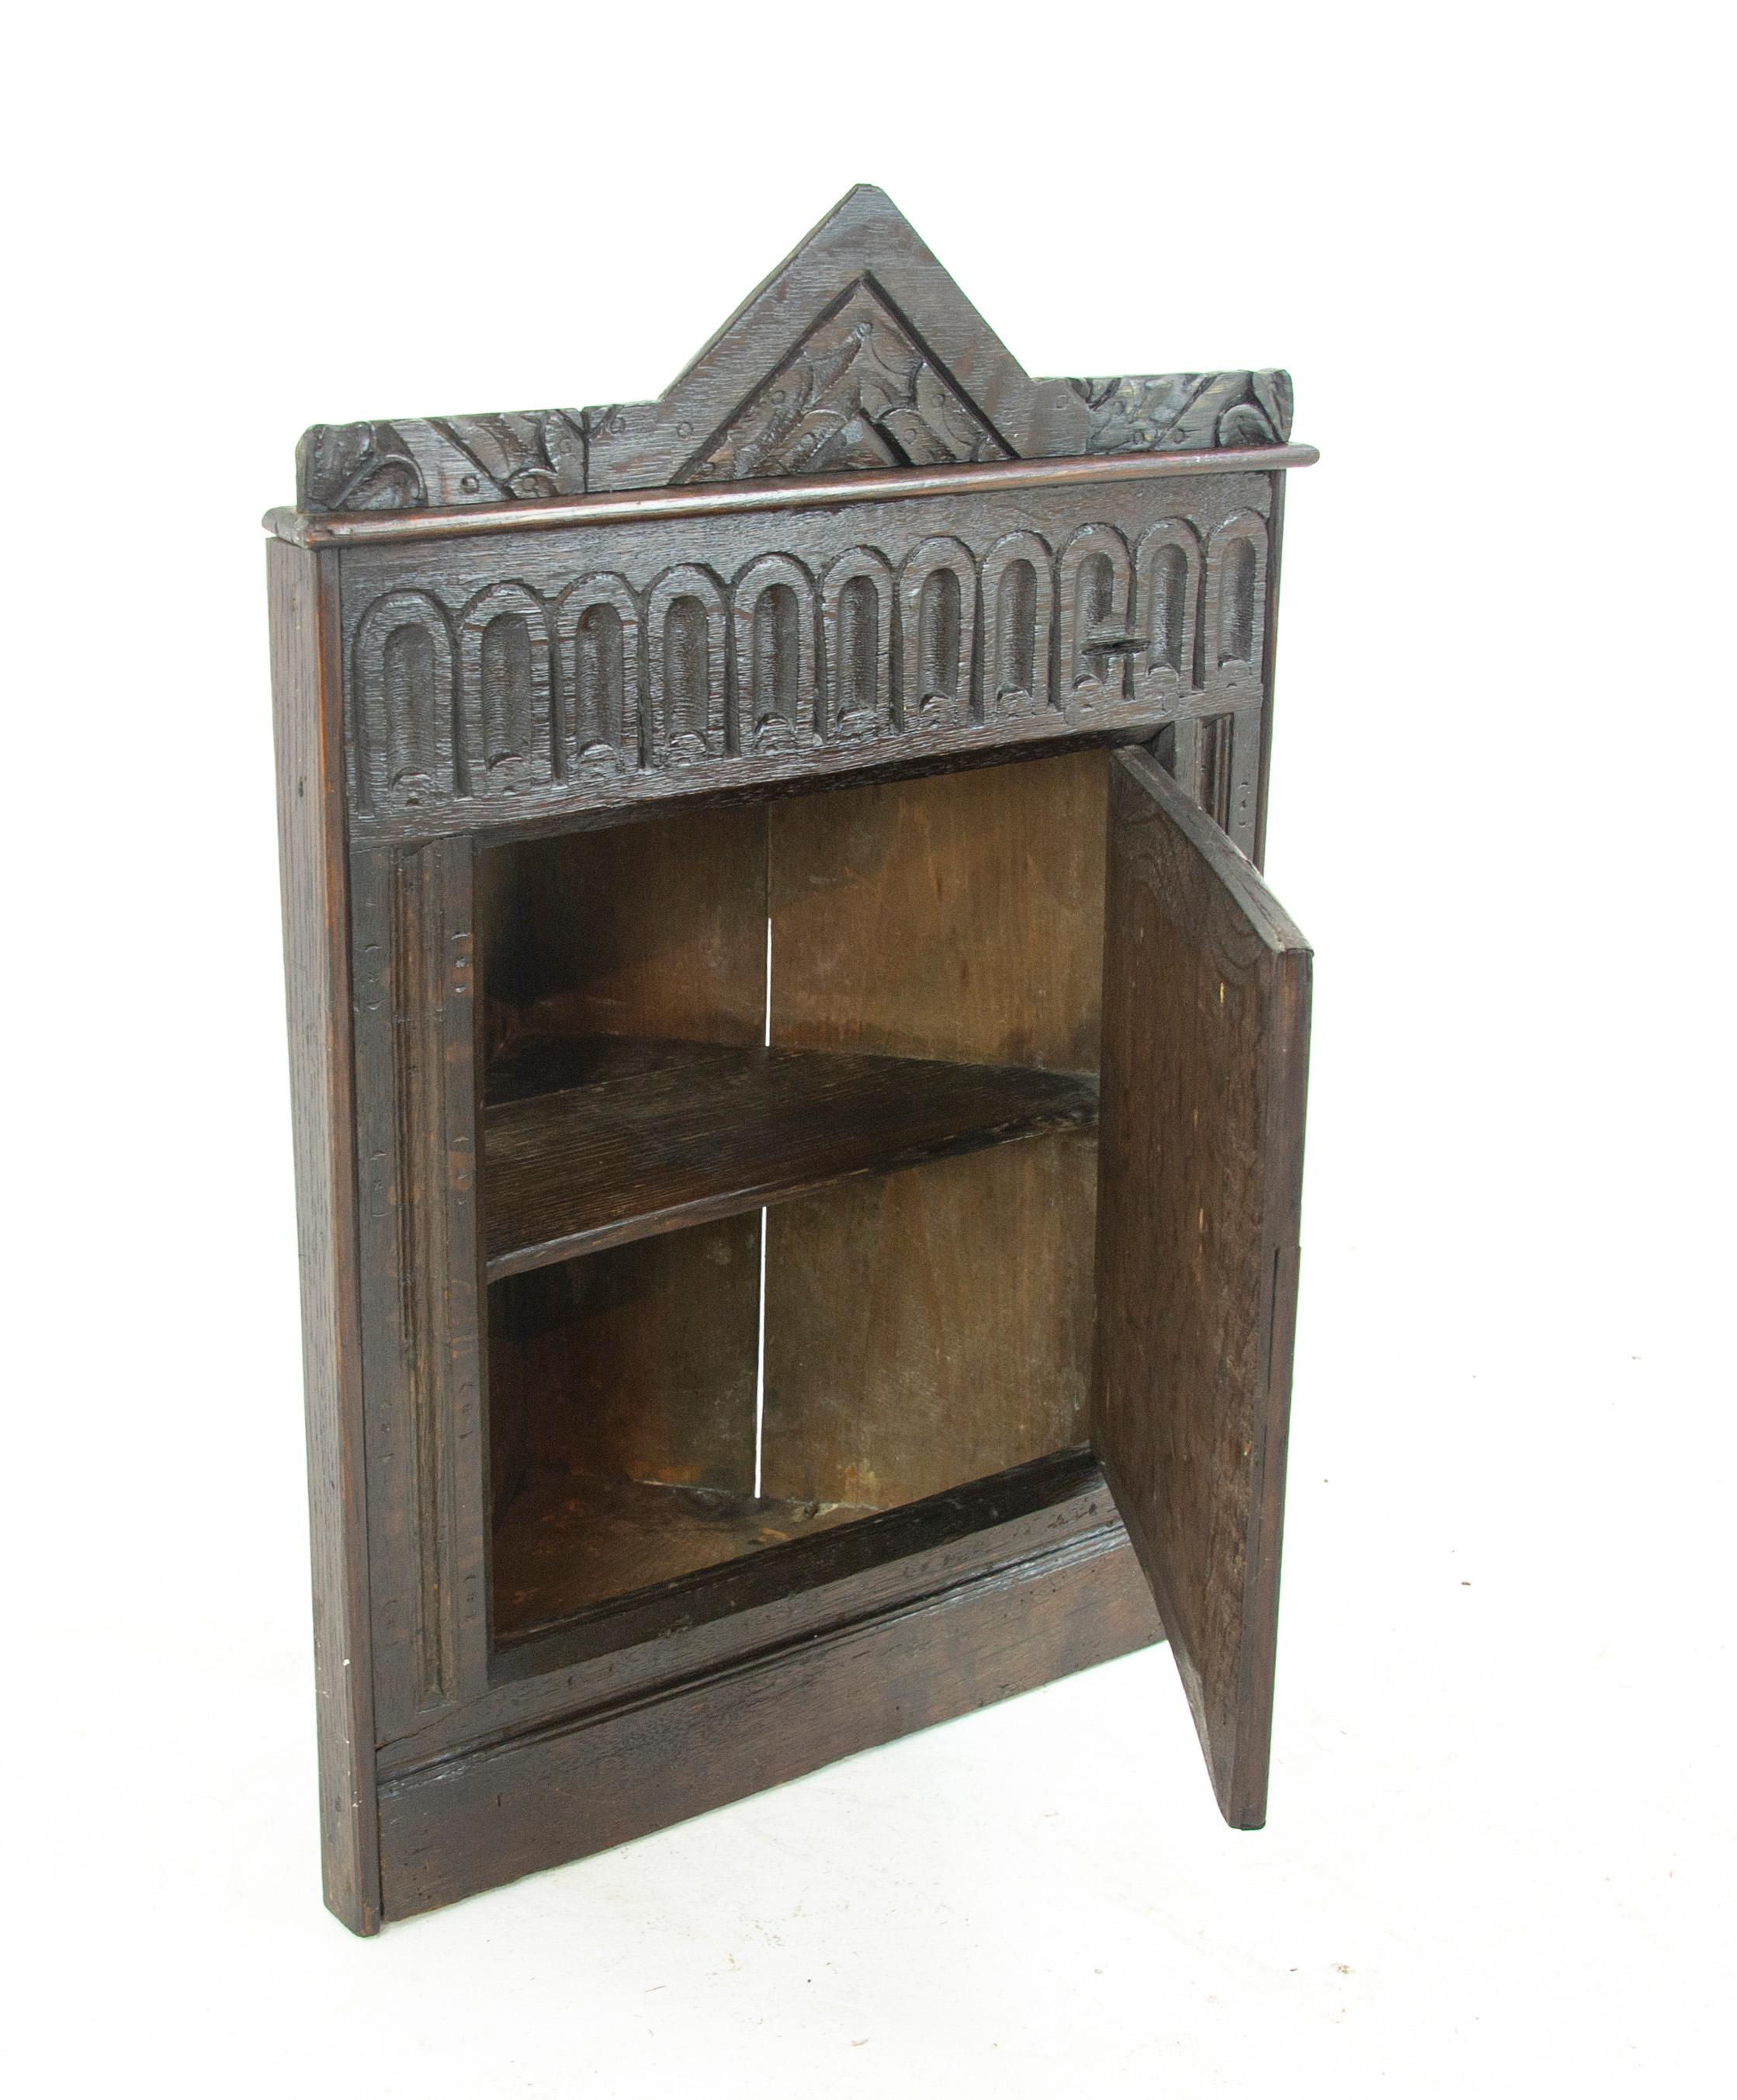 Antique corner cabinet, Victorian hanging wall cabinet, entryway furniture, Scotland 1860, Antique Furniture, B1472

Scotland 1860
Solid oak construction
Carved pediment above
Single carved door below
Fitted interior with single shelf
All original